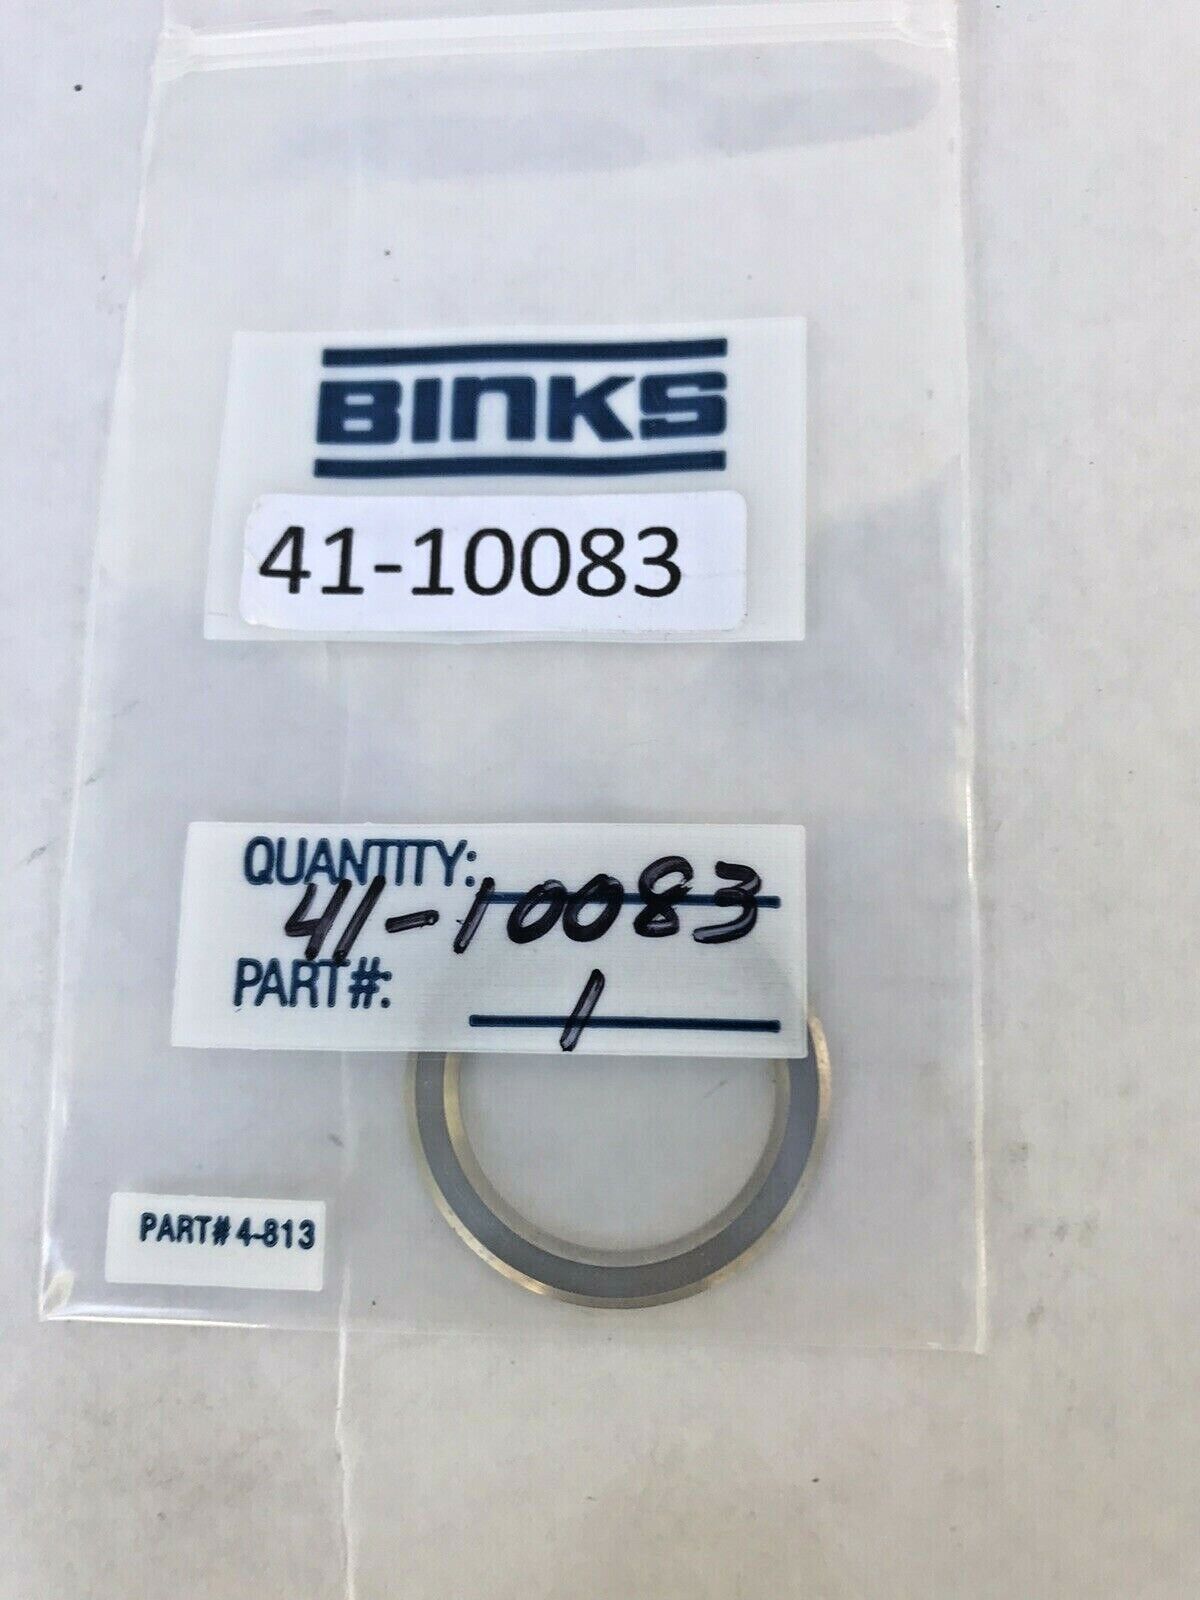 ONE LOT OF 7 BINKS SKU'S = RETAINERS / GLANDS / RETAINERS AND GASKETS - 20 ITEMS Binks 41-10075 / 41-10080 / 41-10083 MORE - фотография #4